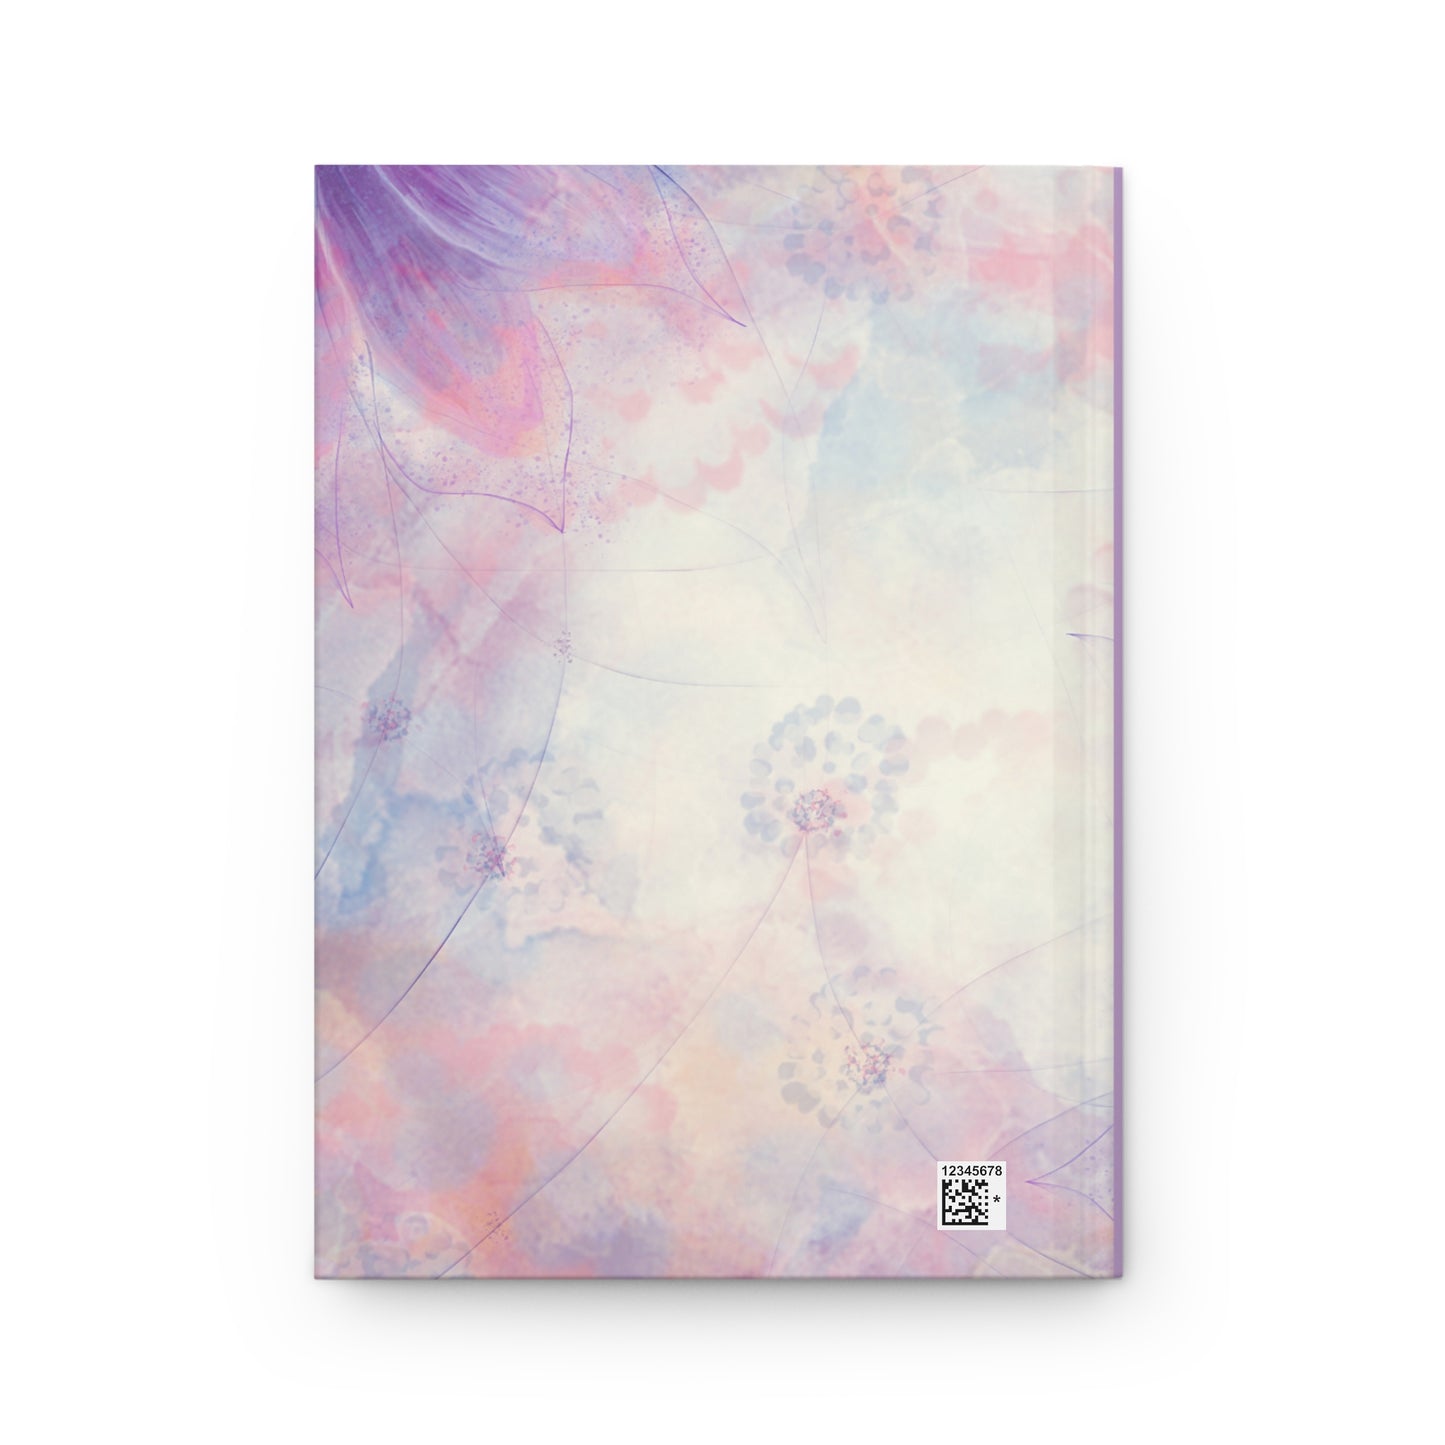 Peach and Purple Daisies Floral Hardcover Journal Matte